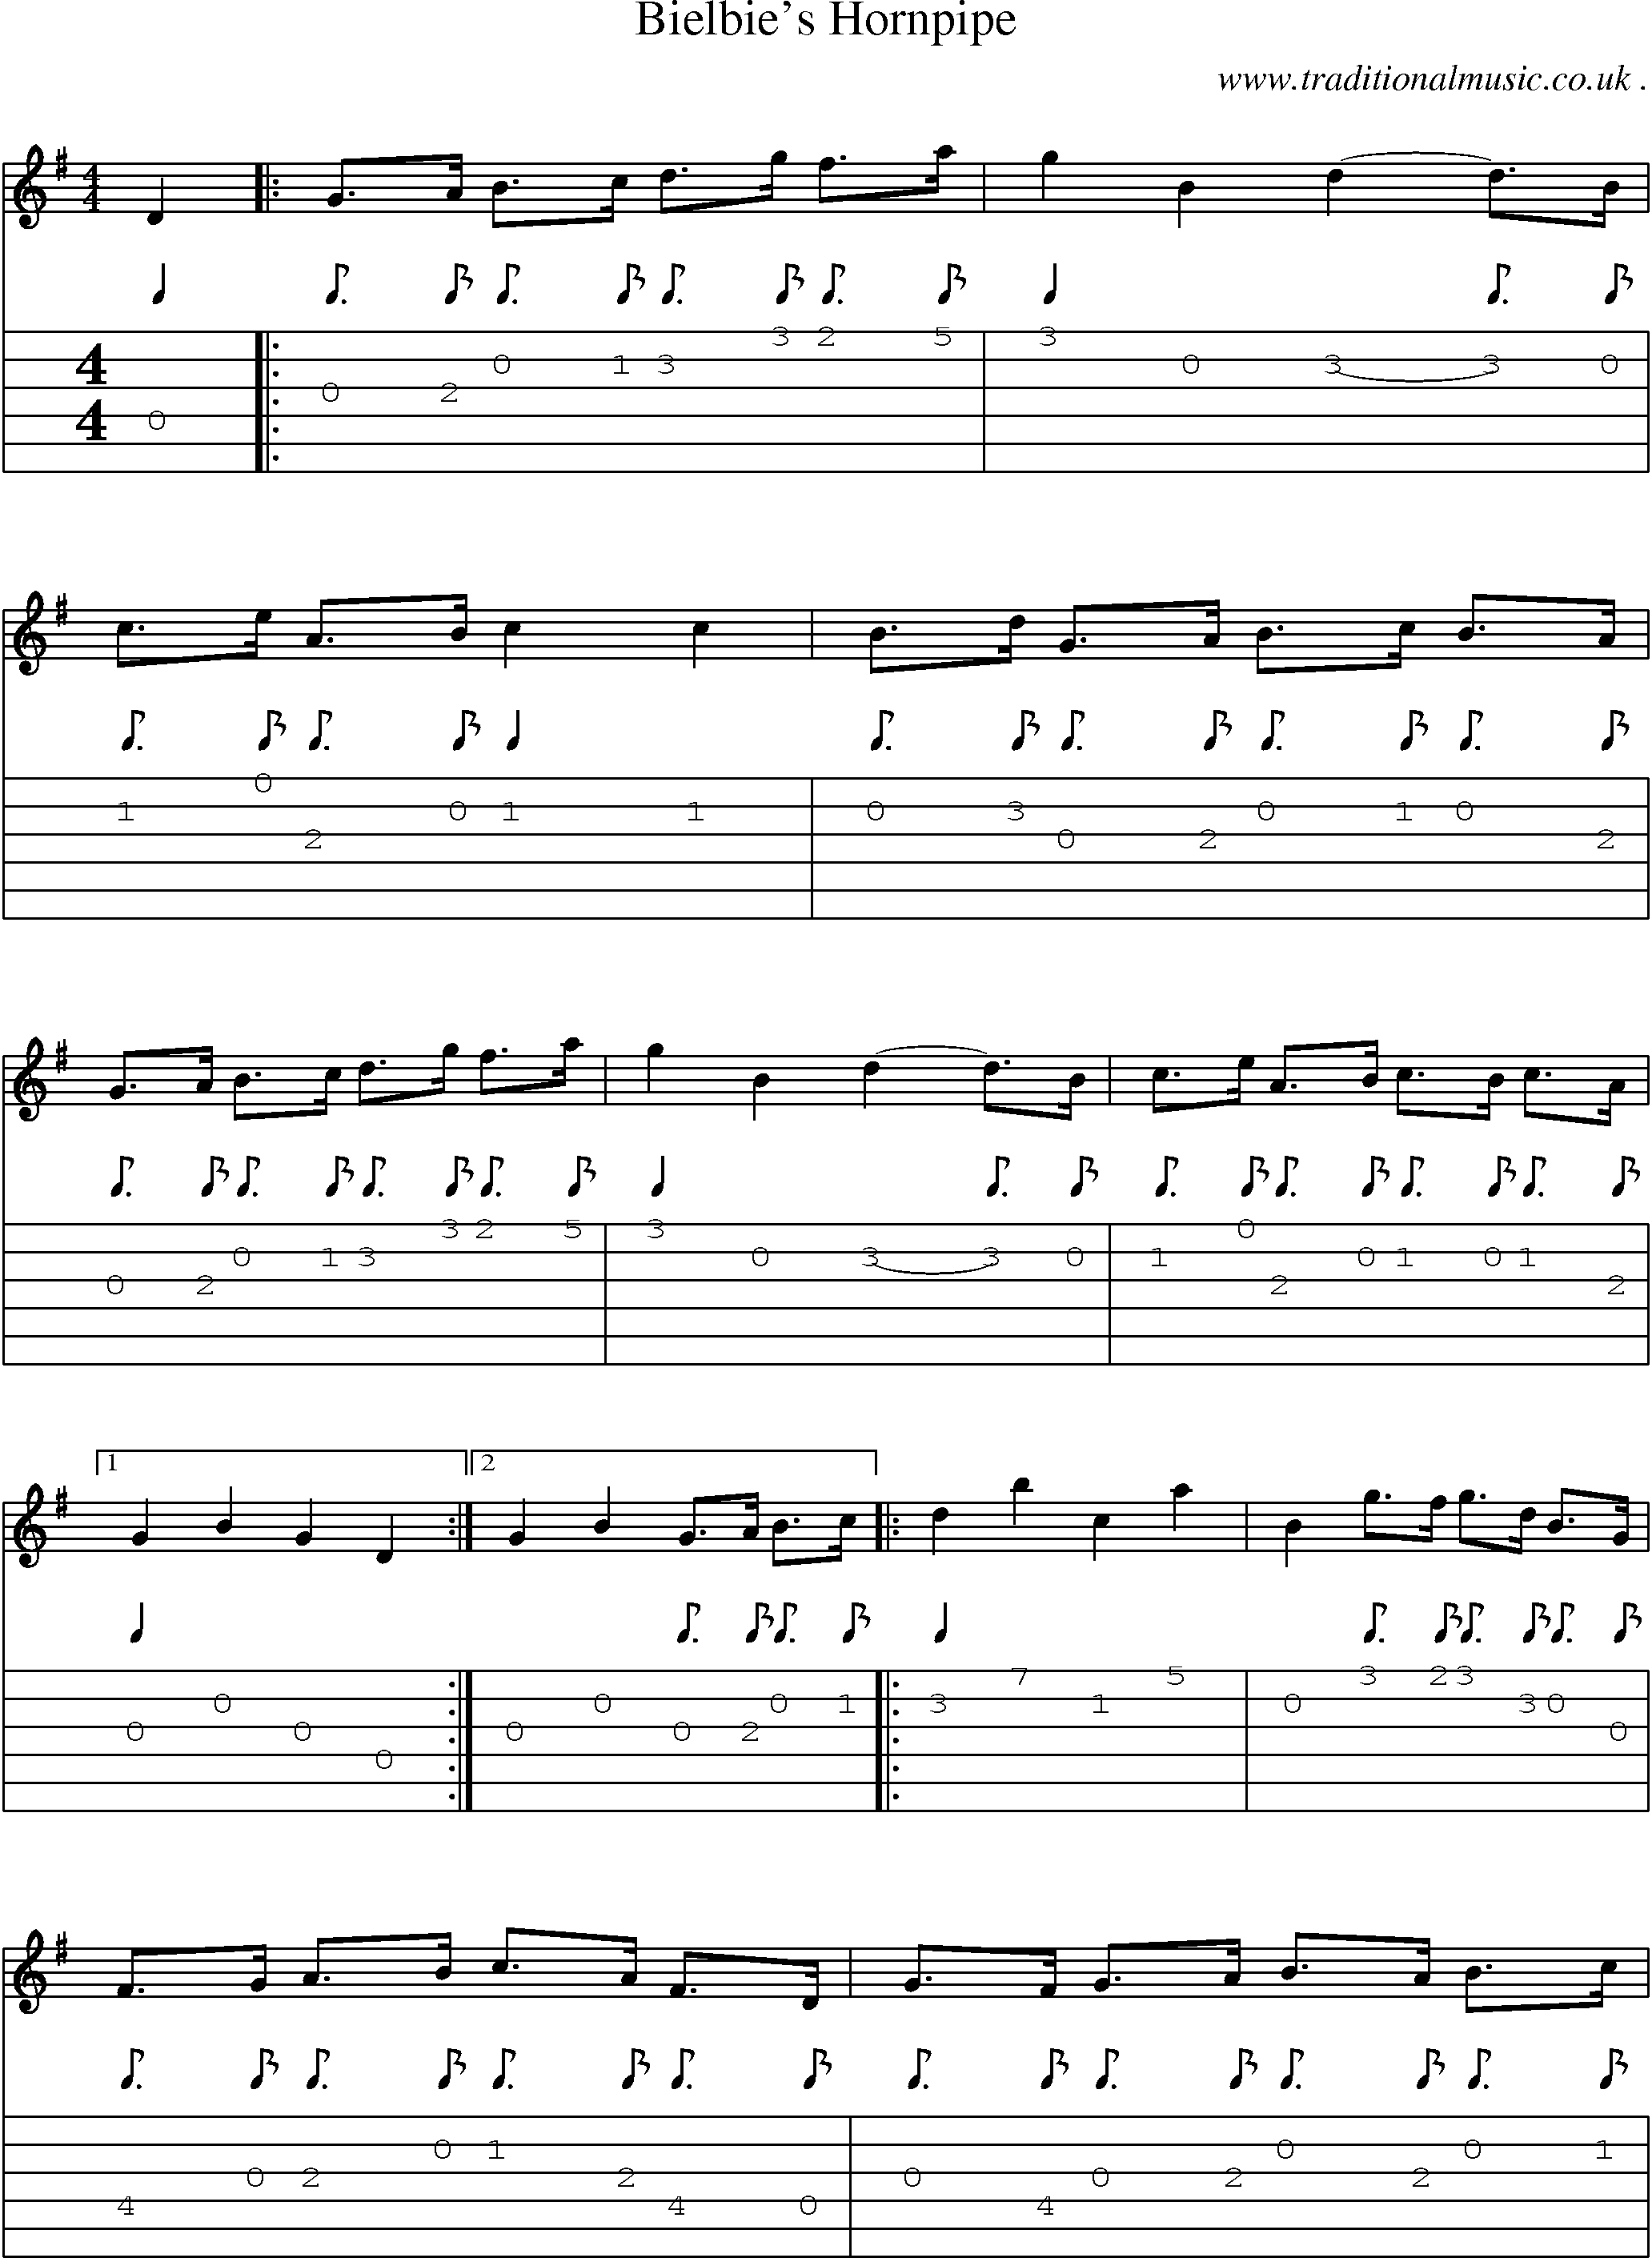 Sheet-Music and Guitar Tabs for Bielbies Hornpipe